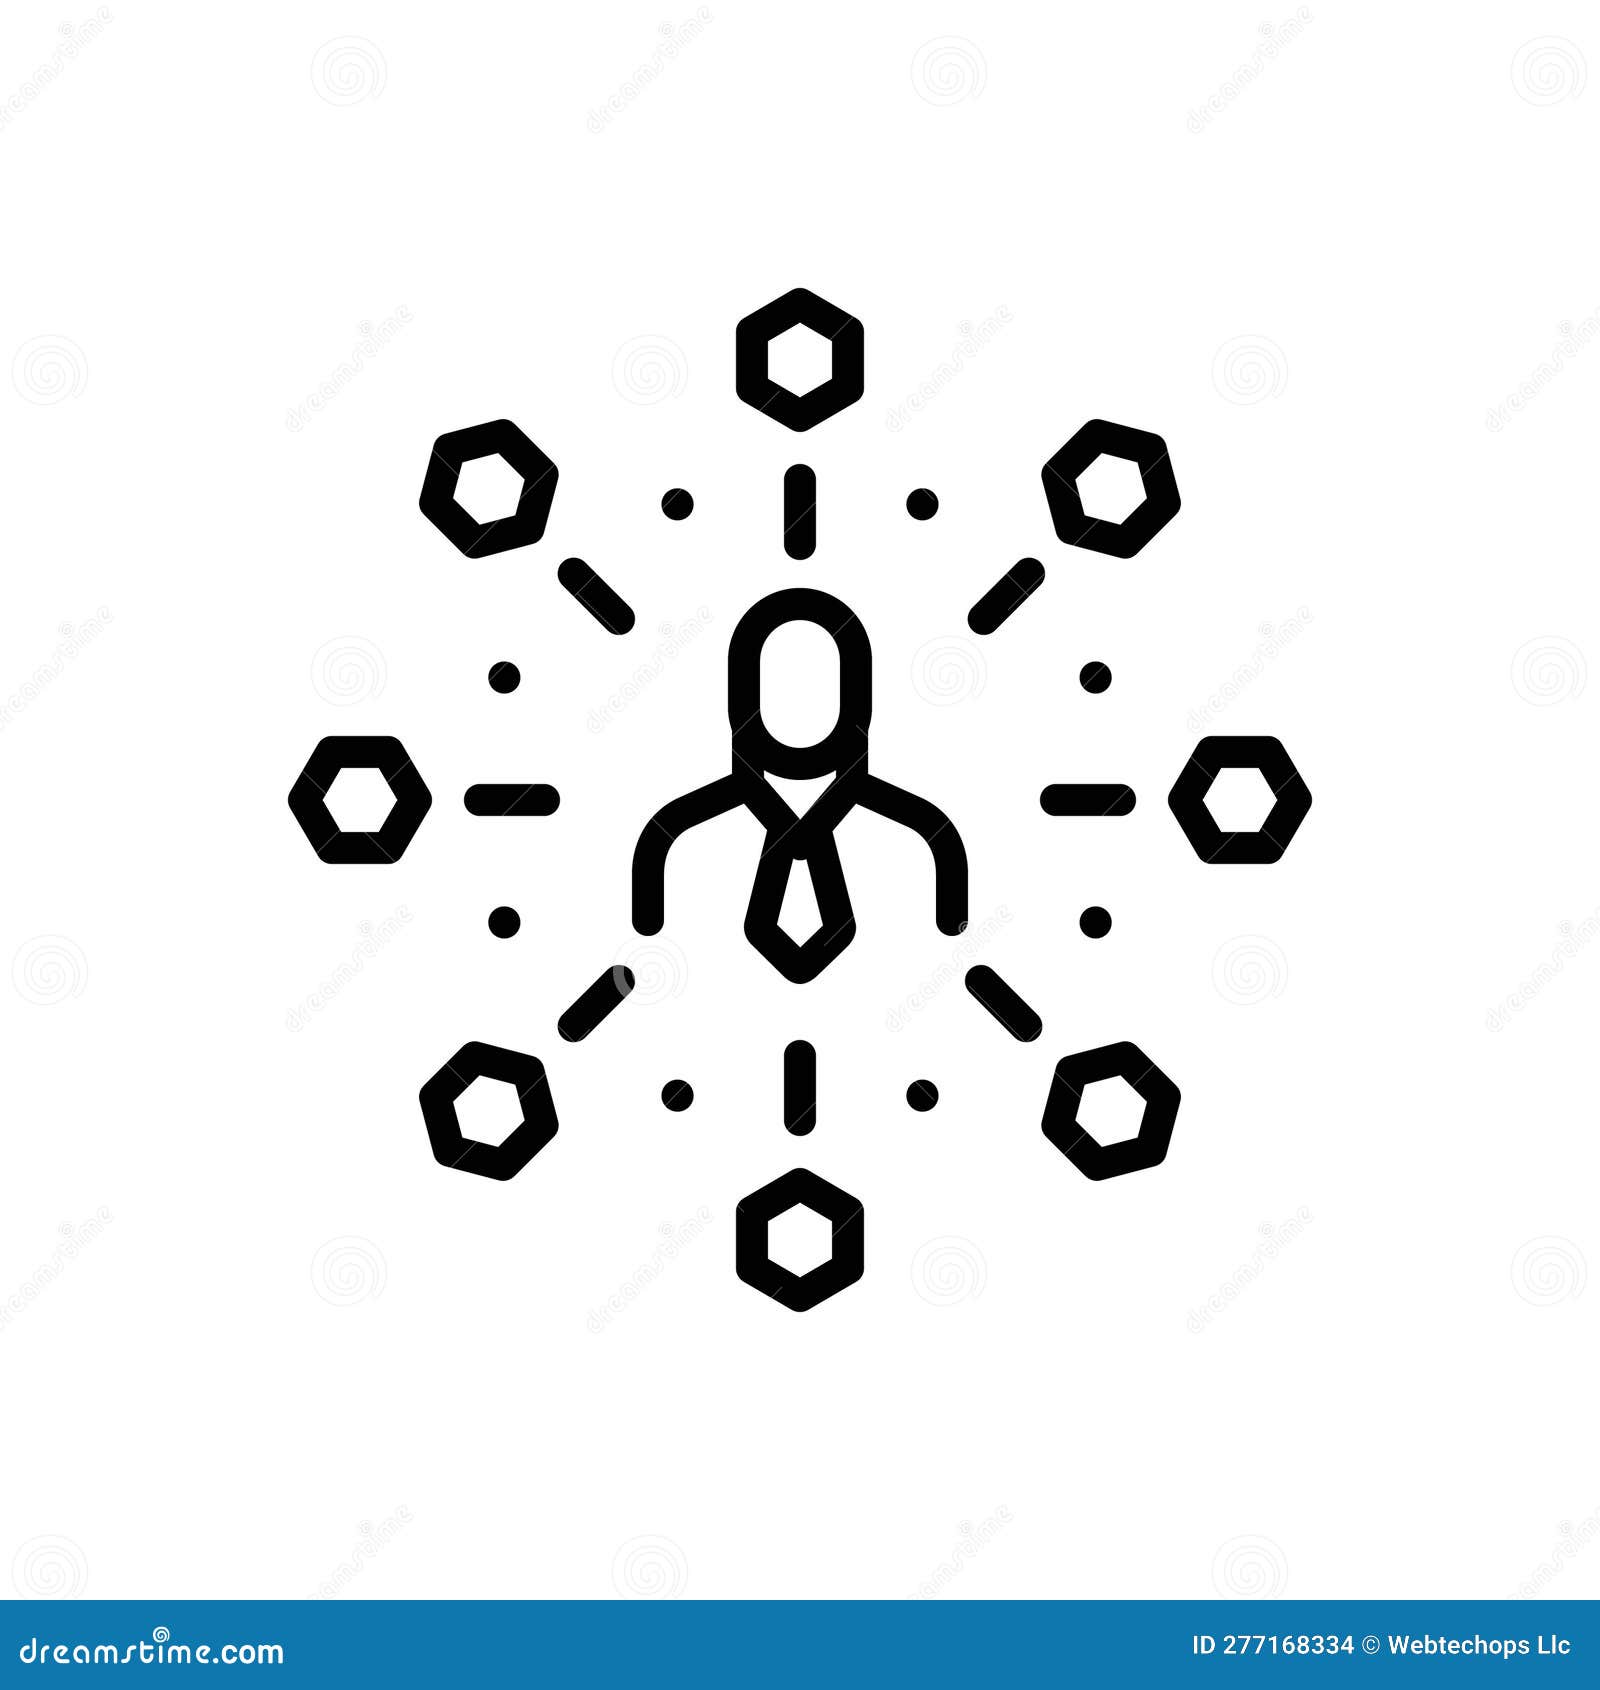 black line icon for affiliates, modulate and connection